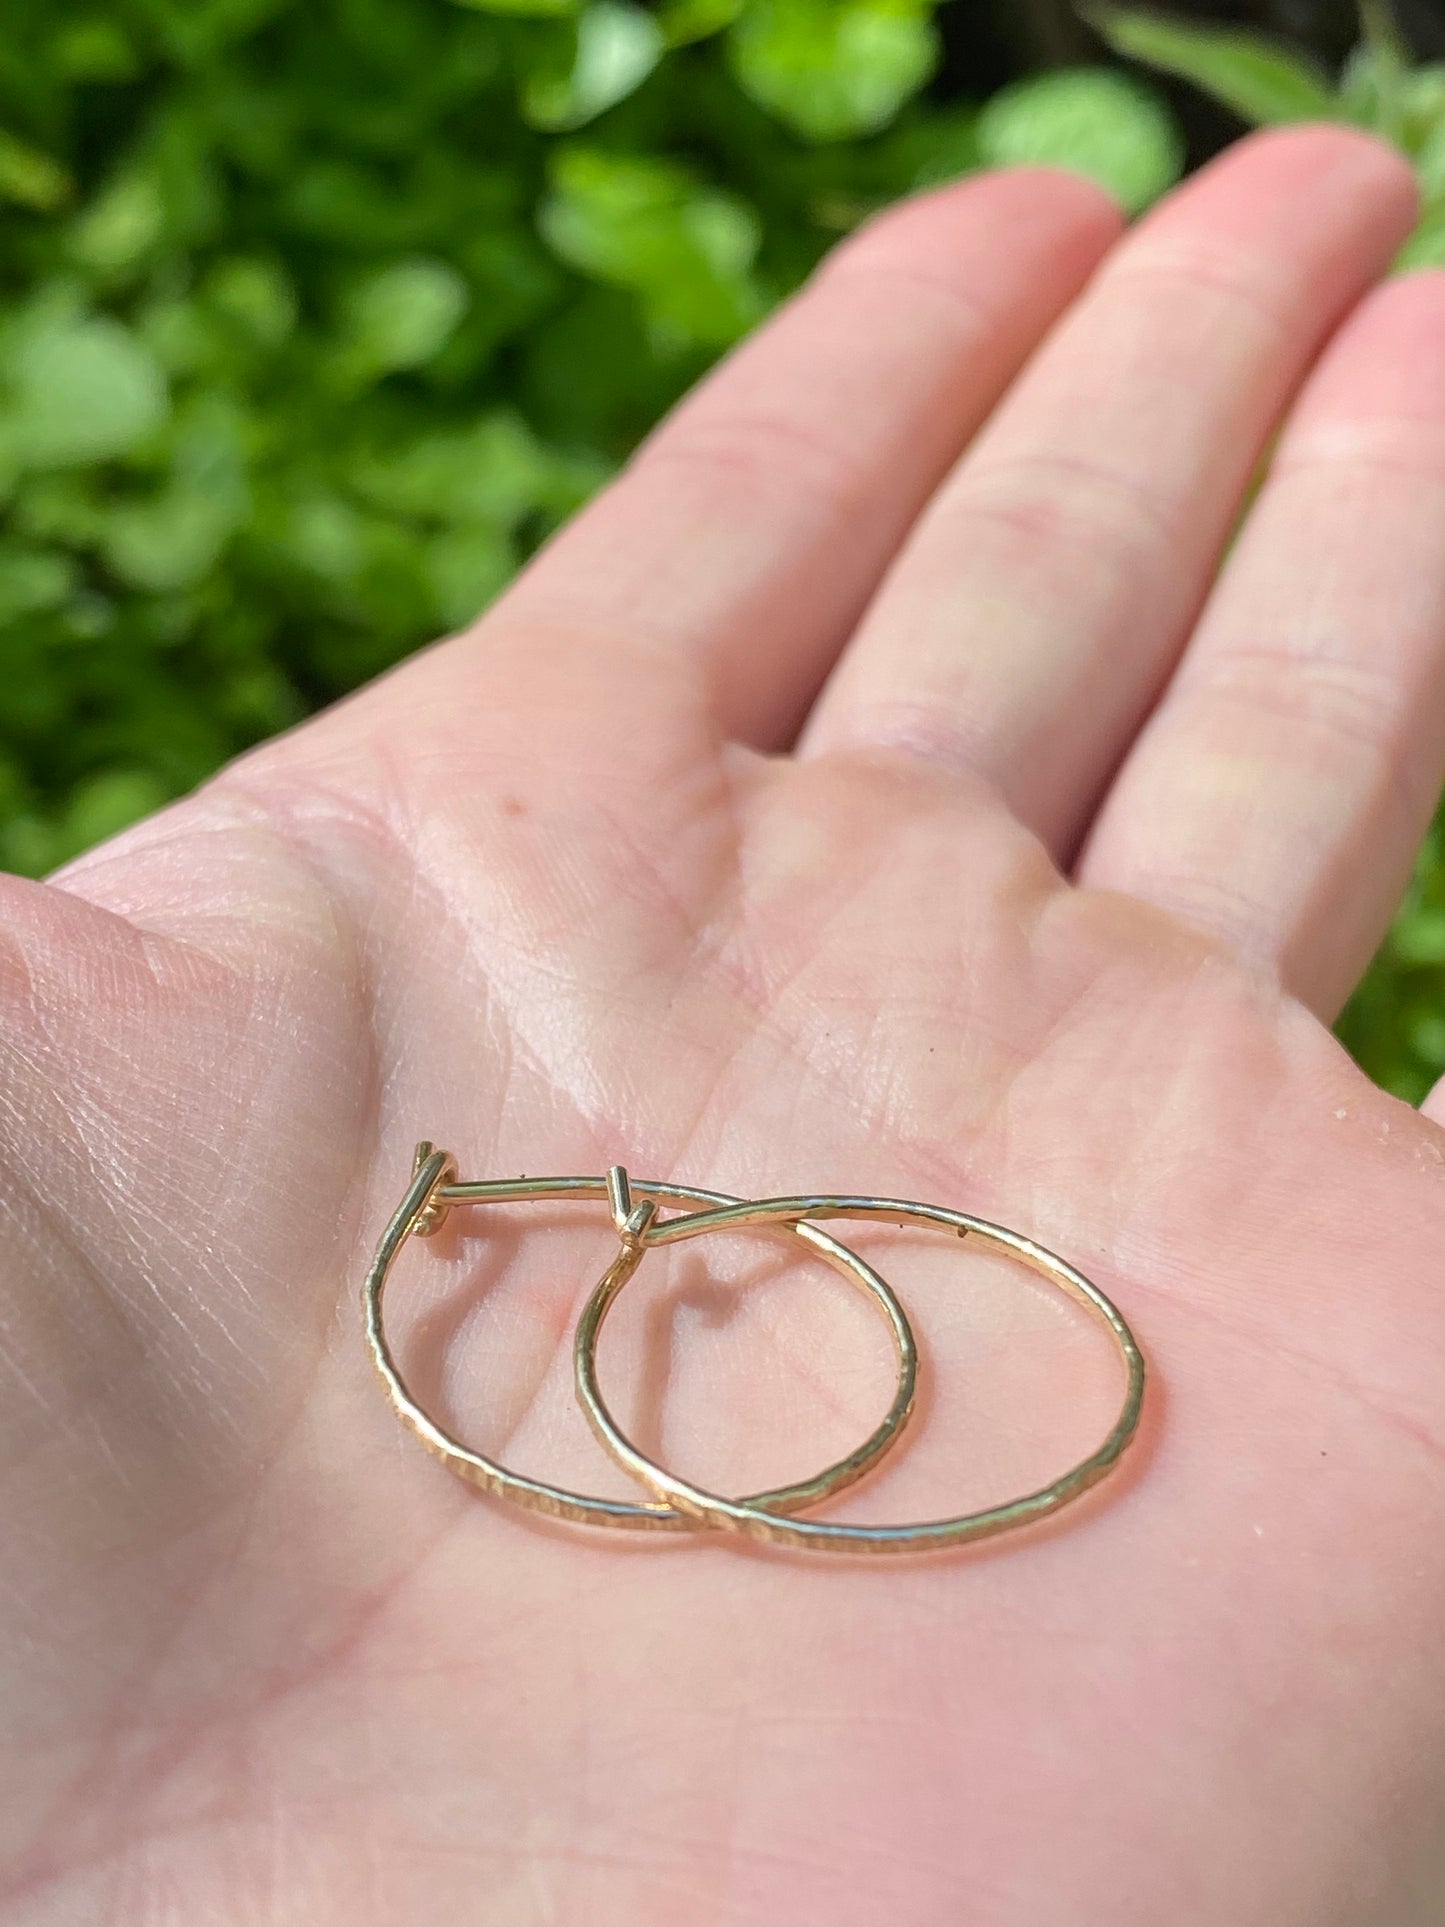 Small Hoop Earrings in Sterling Silver or Gold Fill *Live your life Collection